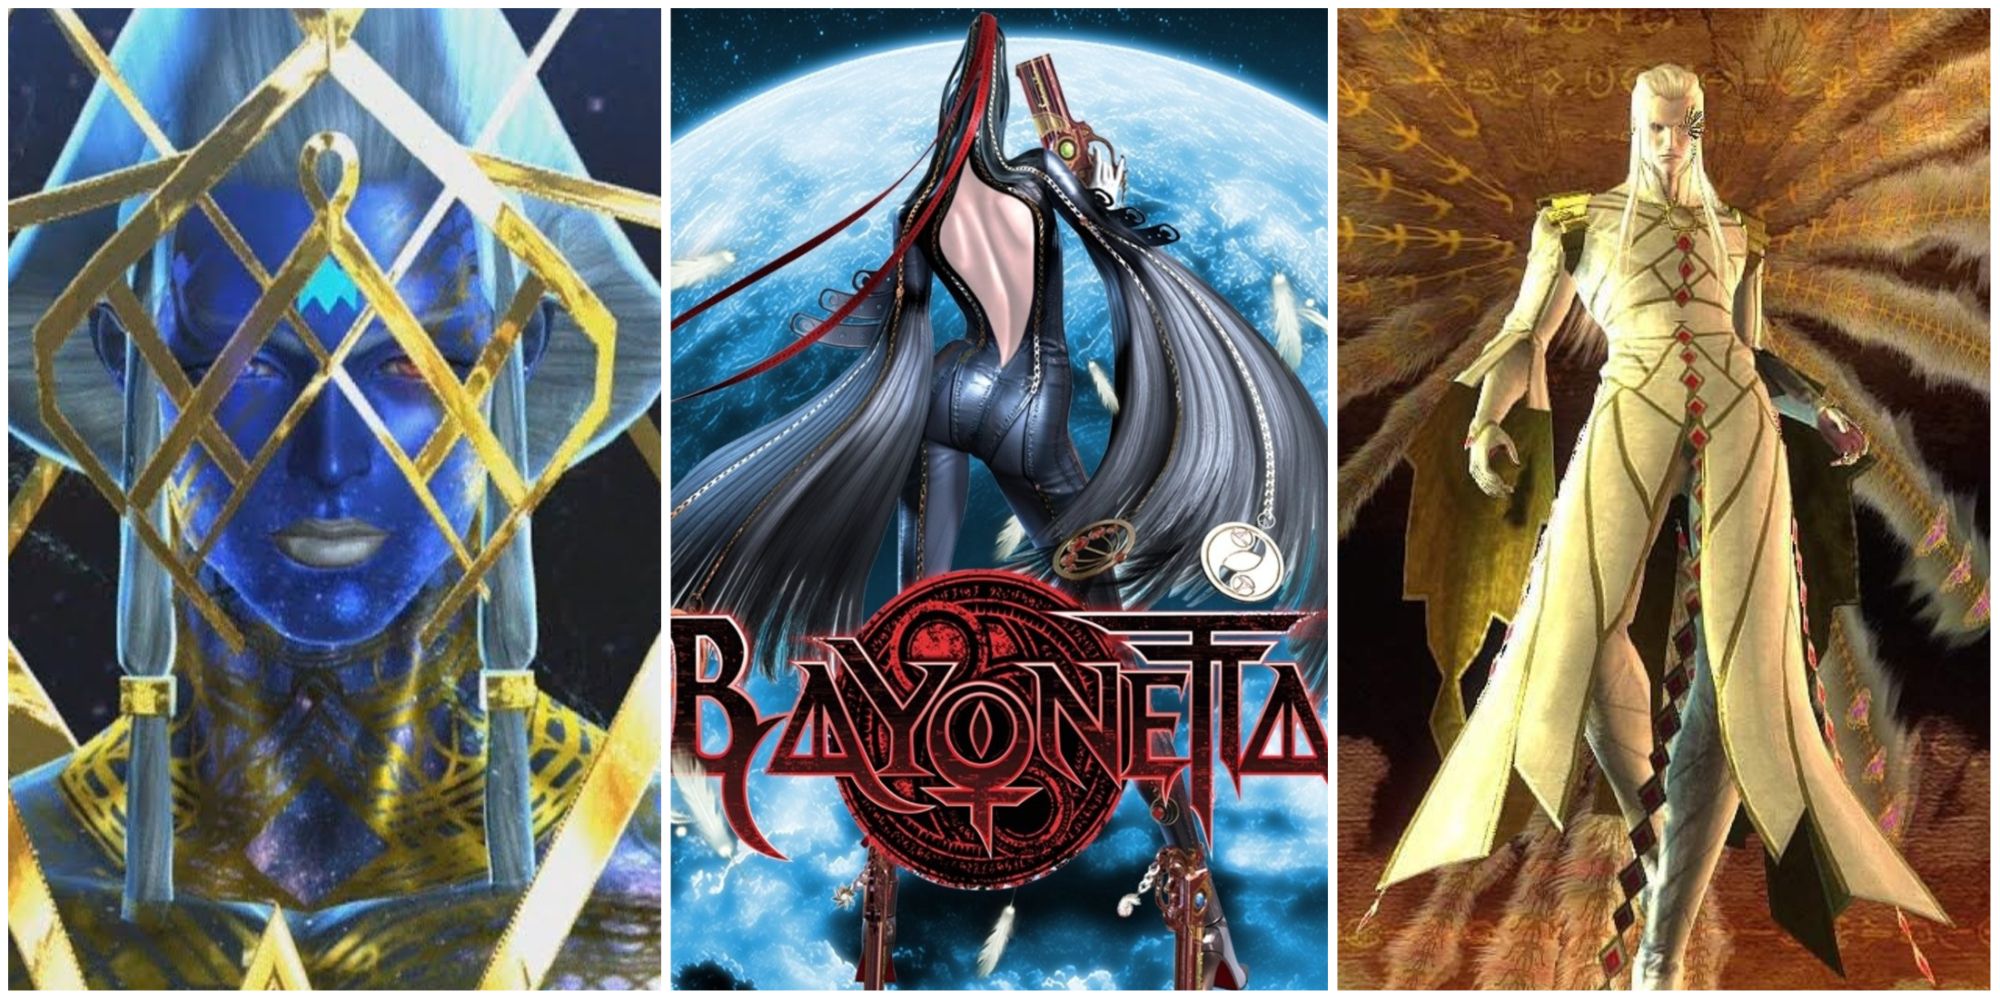 A close-up of Aesir, the cover image of Bayonetta 1, and Balder from Bayonetta 2 with his peacock wings unfurled, left to right